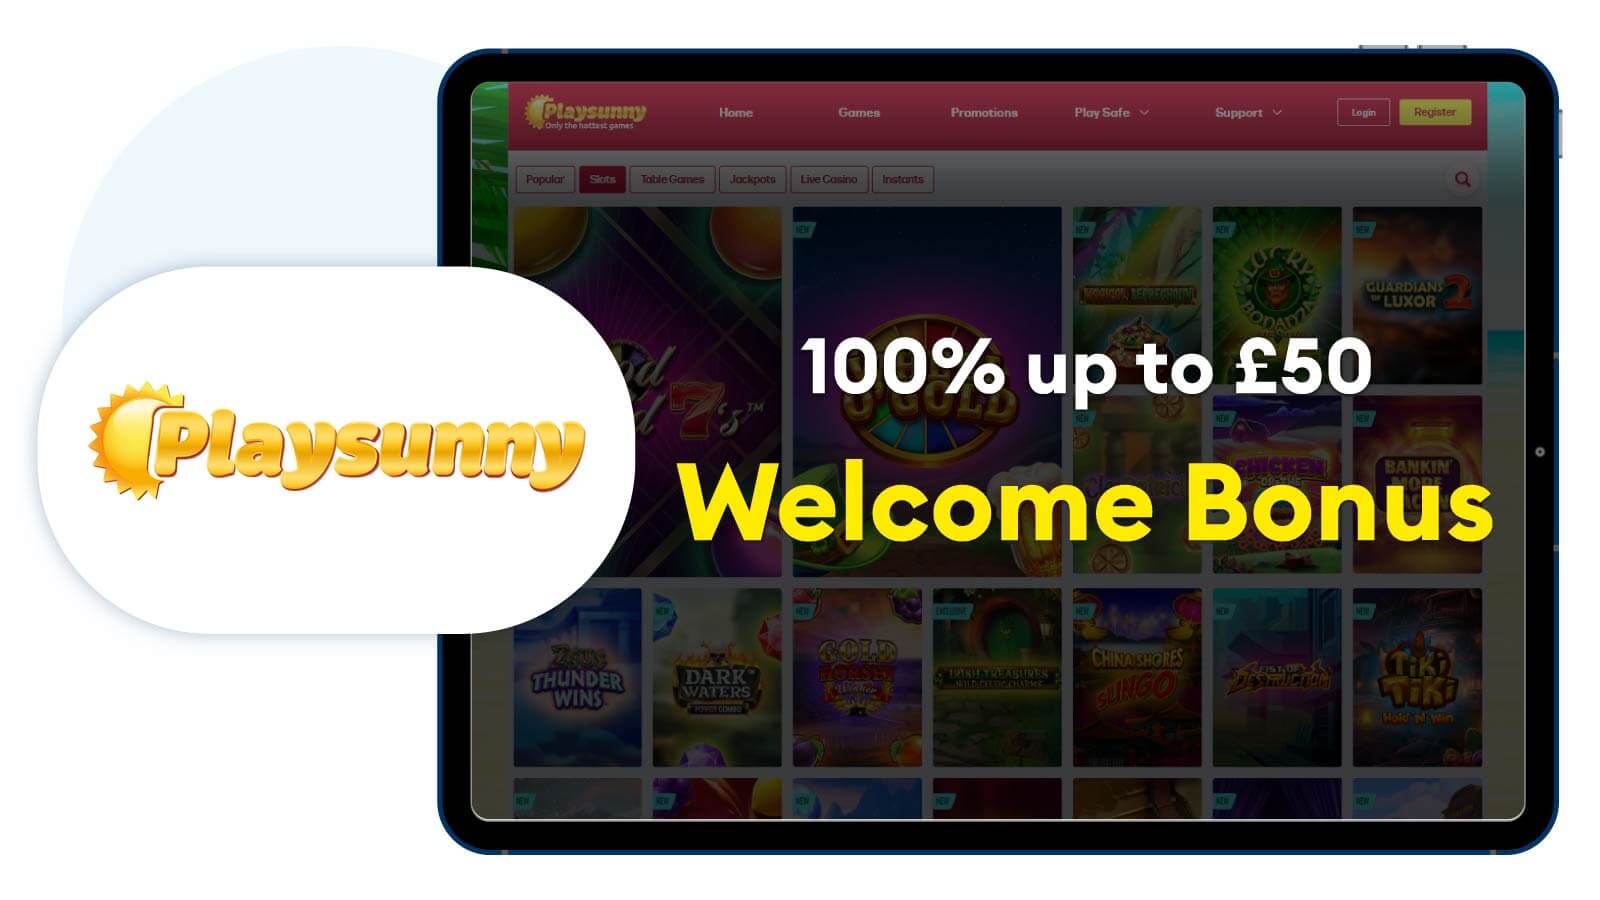 Playsunny-Casino-100%-up-to-£50-Best-Welcome-Bonus-in